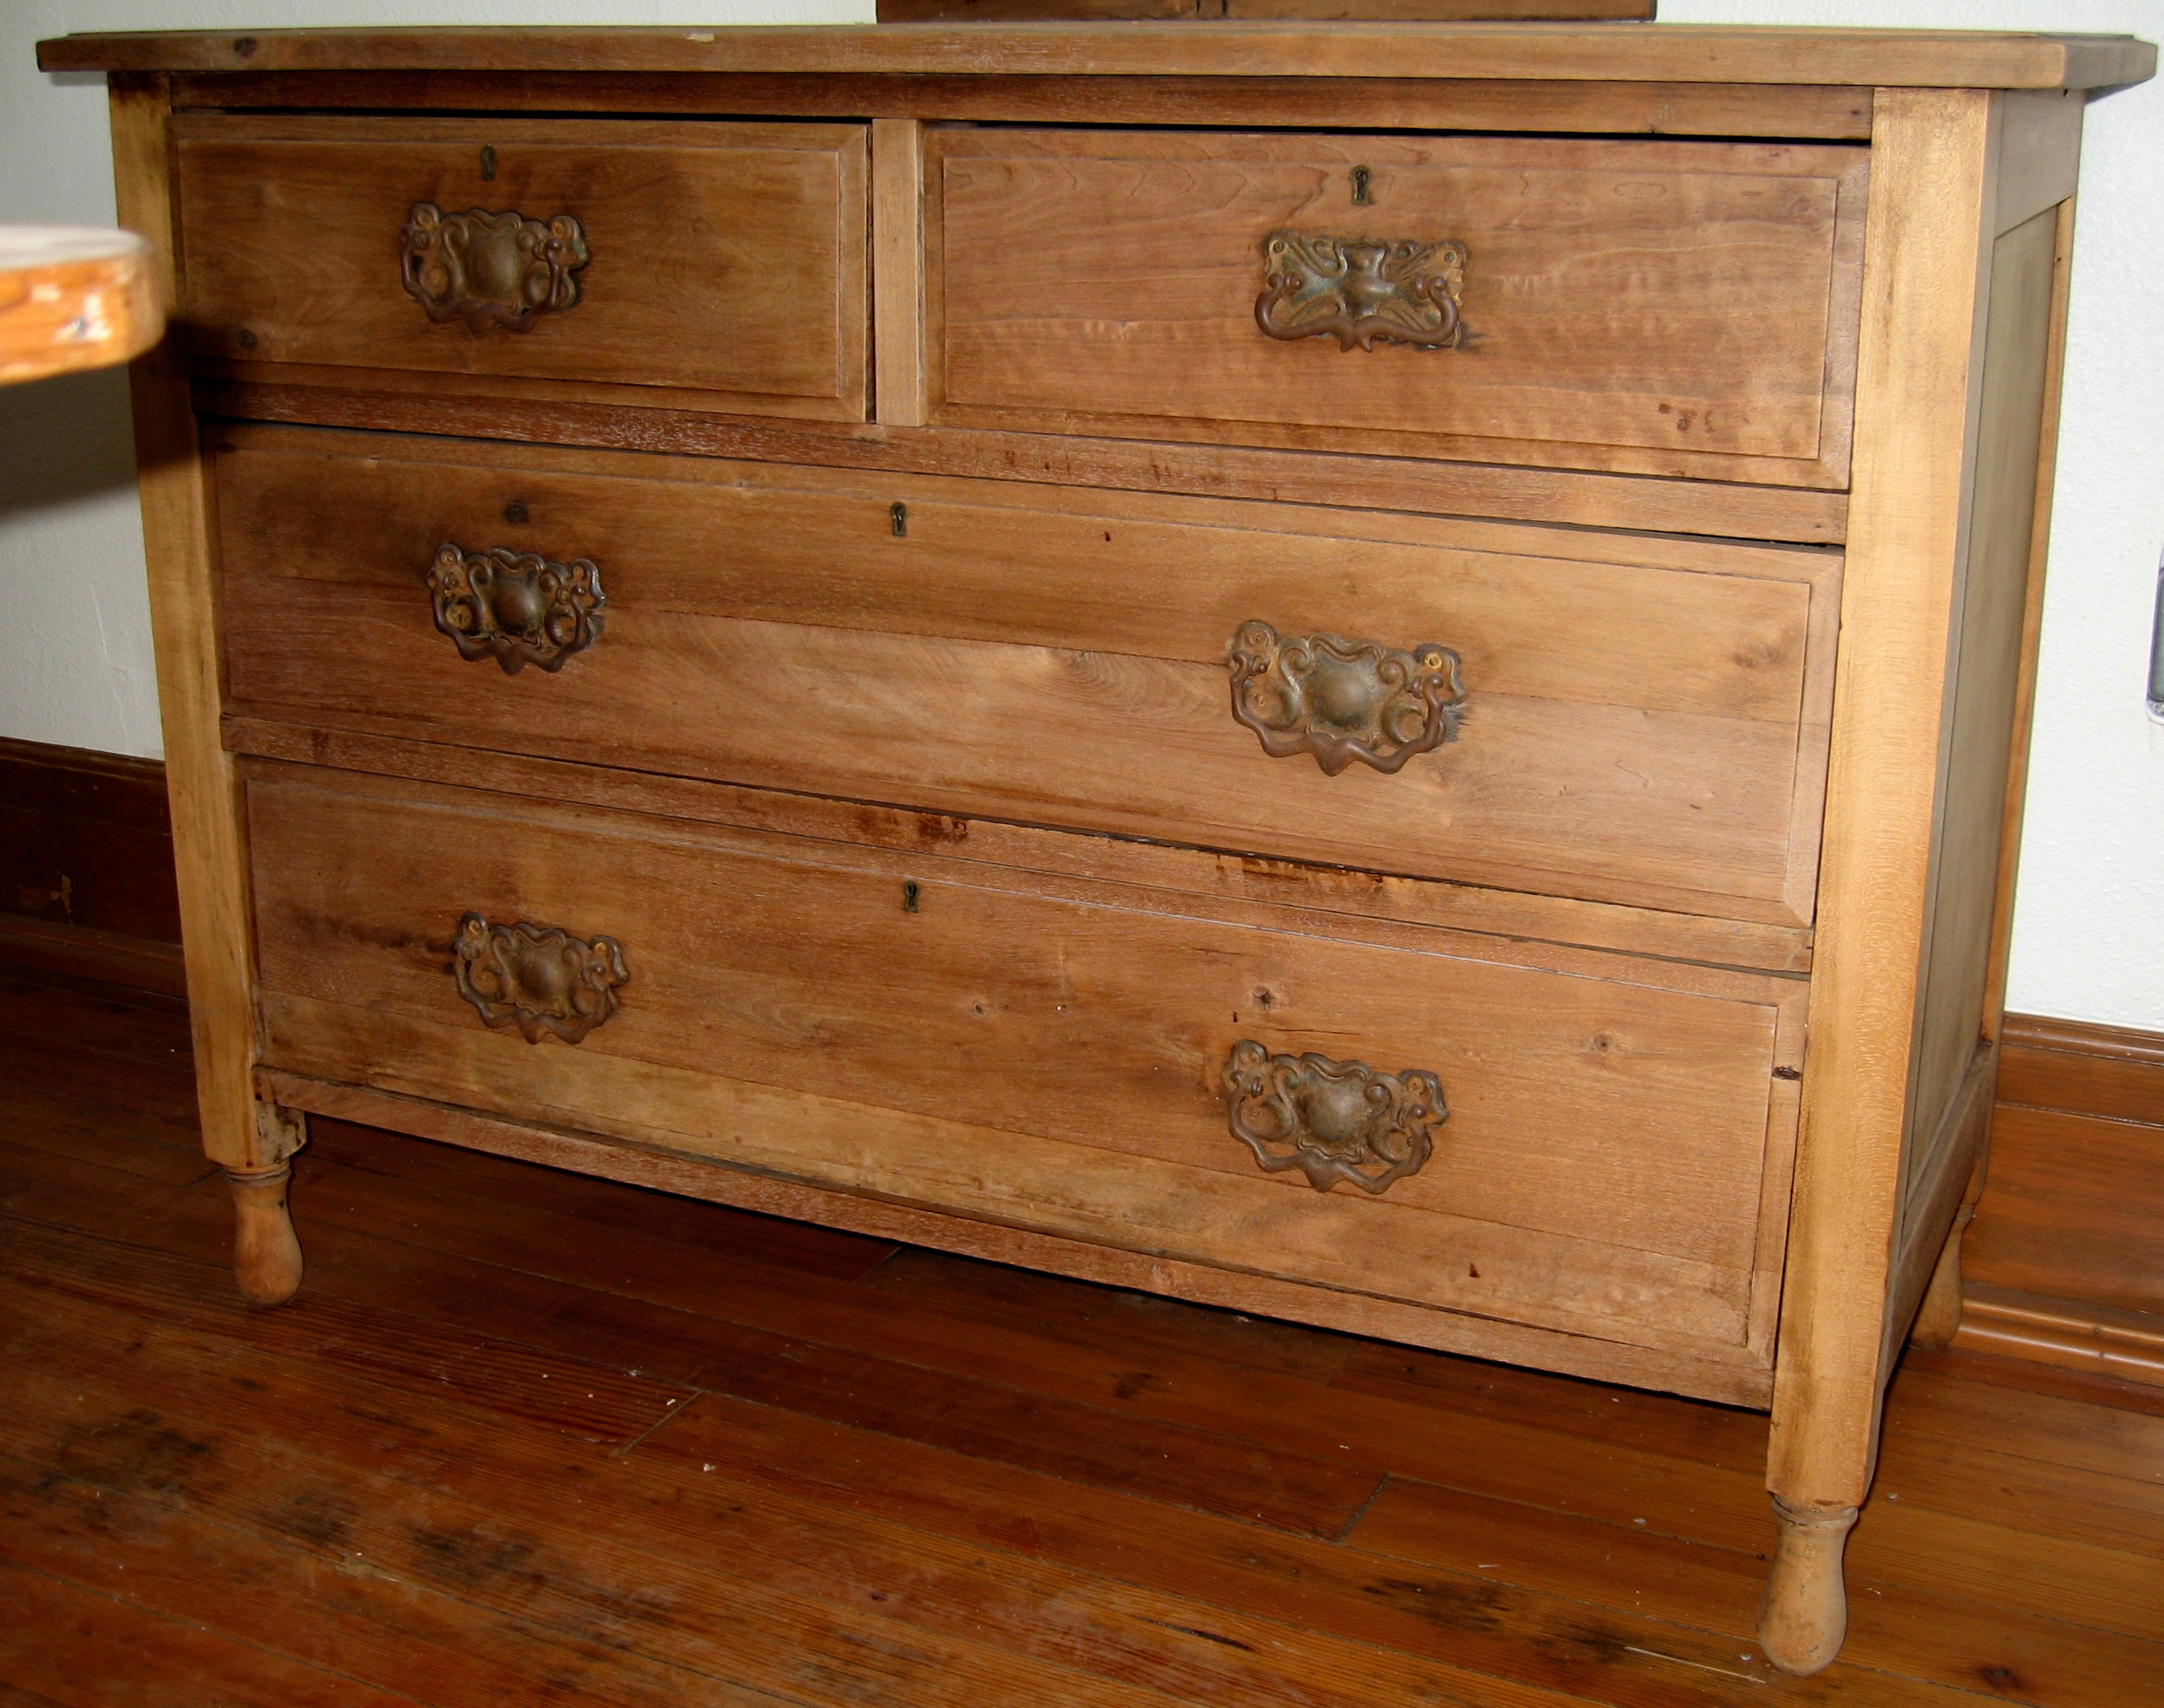 19th Century English 4-Drawer Dresser (Has been stripped& Ready to Re-finish) - (We Will Restore to Your Specifications)